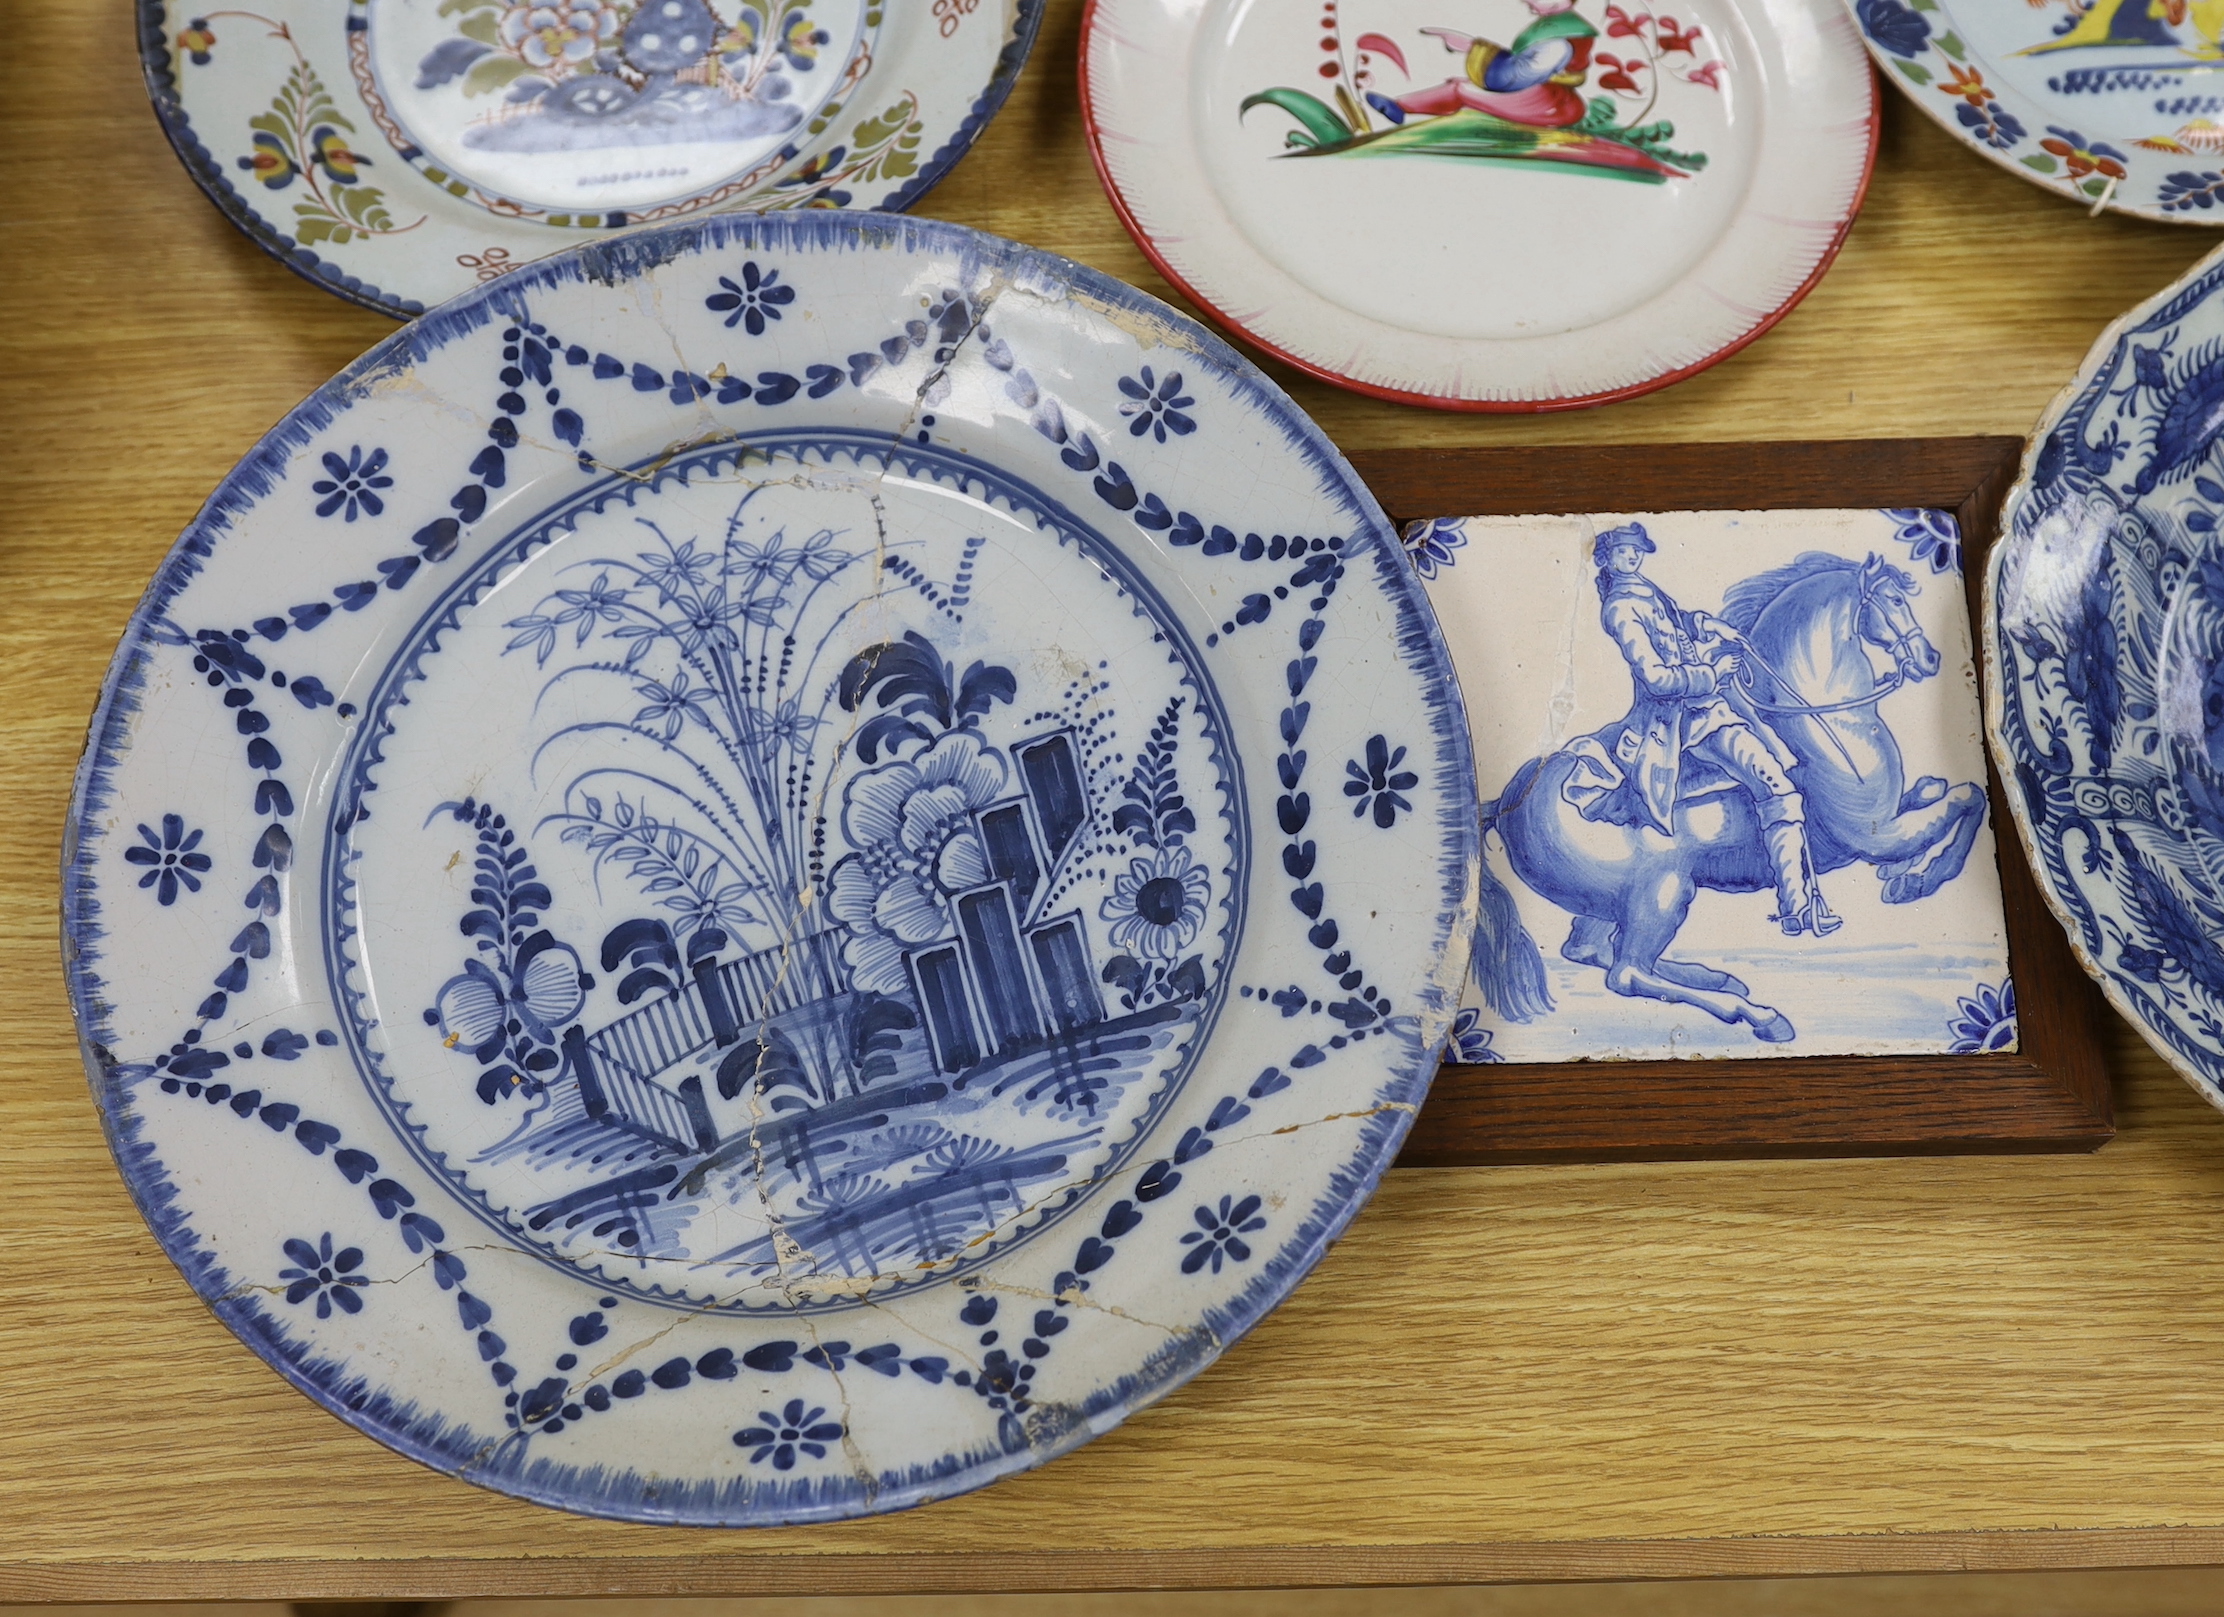 Two 18th century Delft blue and white dishes, a Delft polychrome dish, an English delftware plate, a Delft equestrian tile and a French faience plate, a.f., largest diameter 35cm